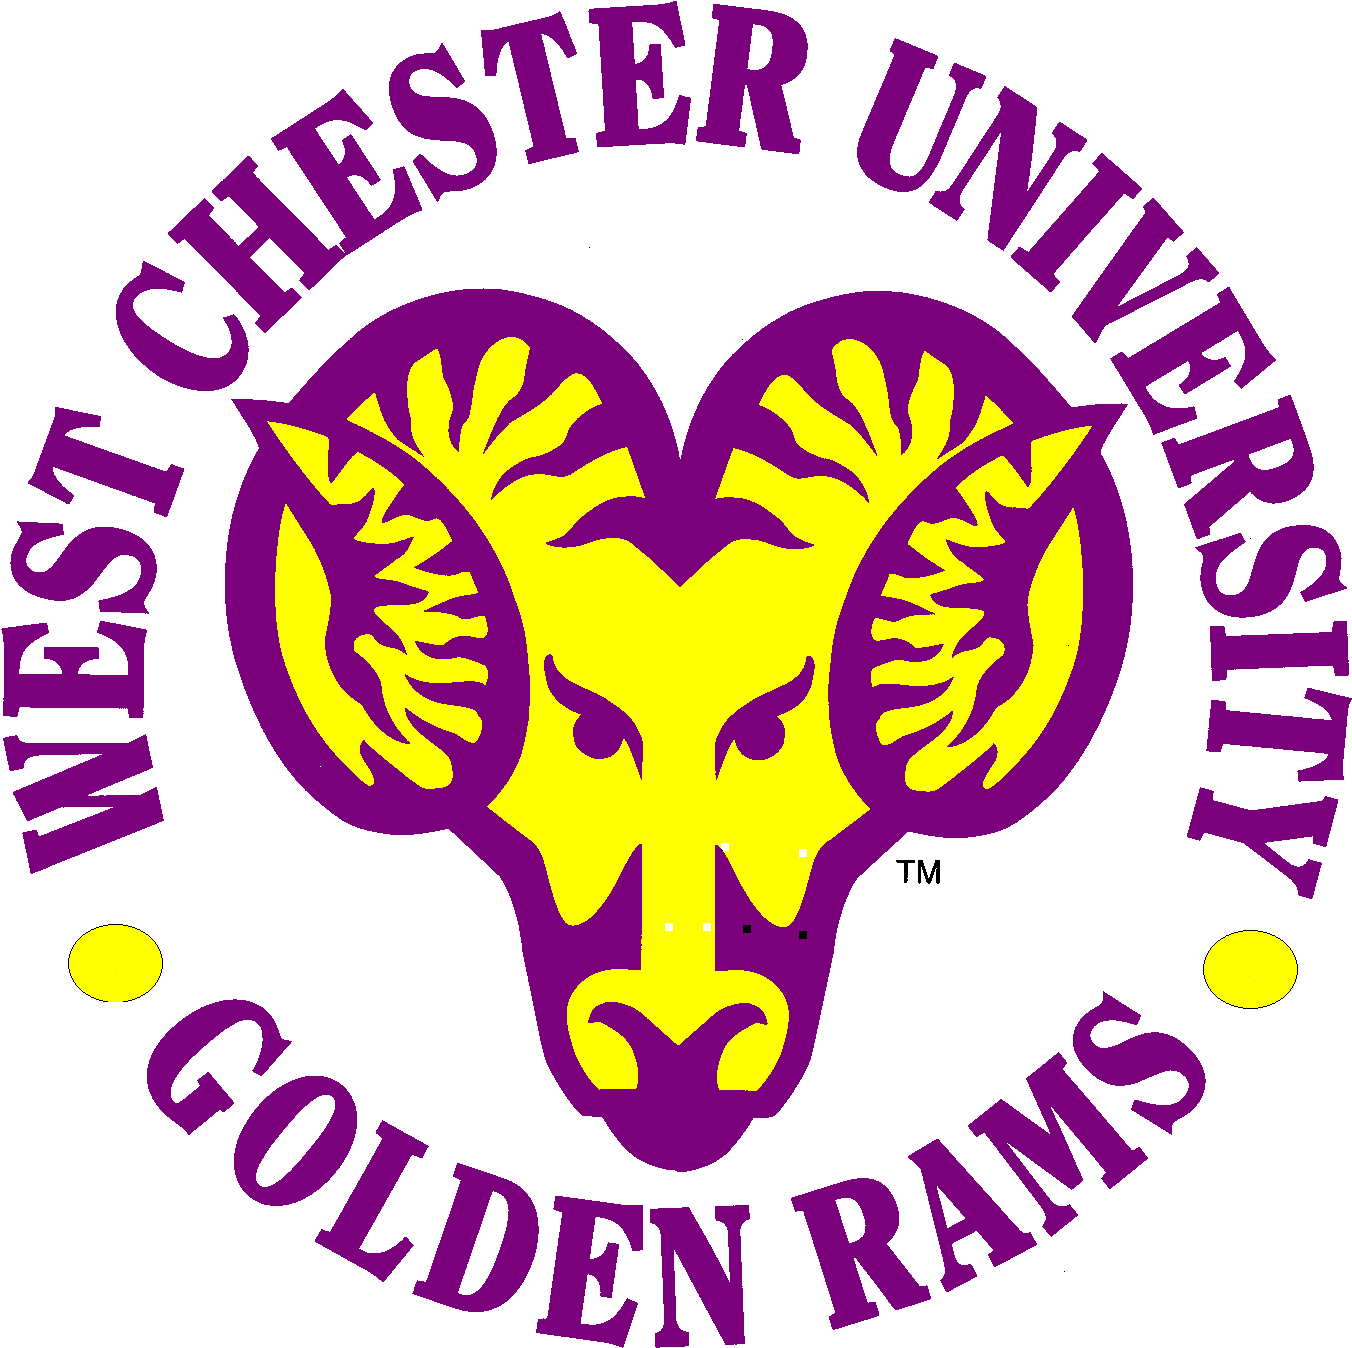 West - West Chester University Of Pennsylvania (1483x1438)